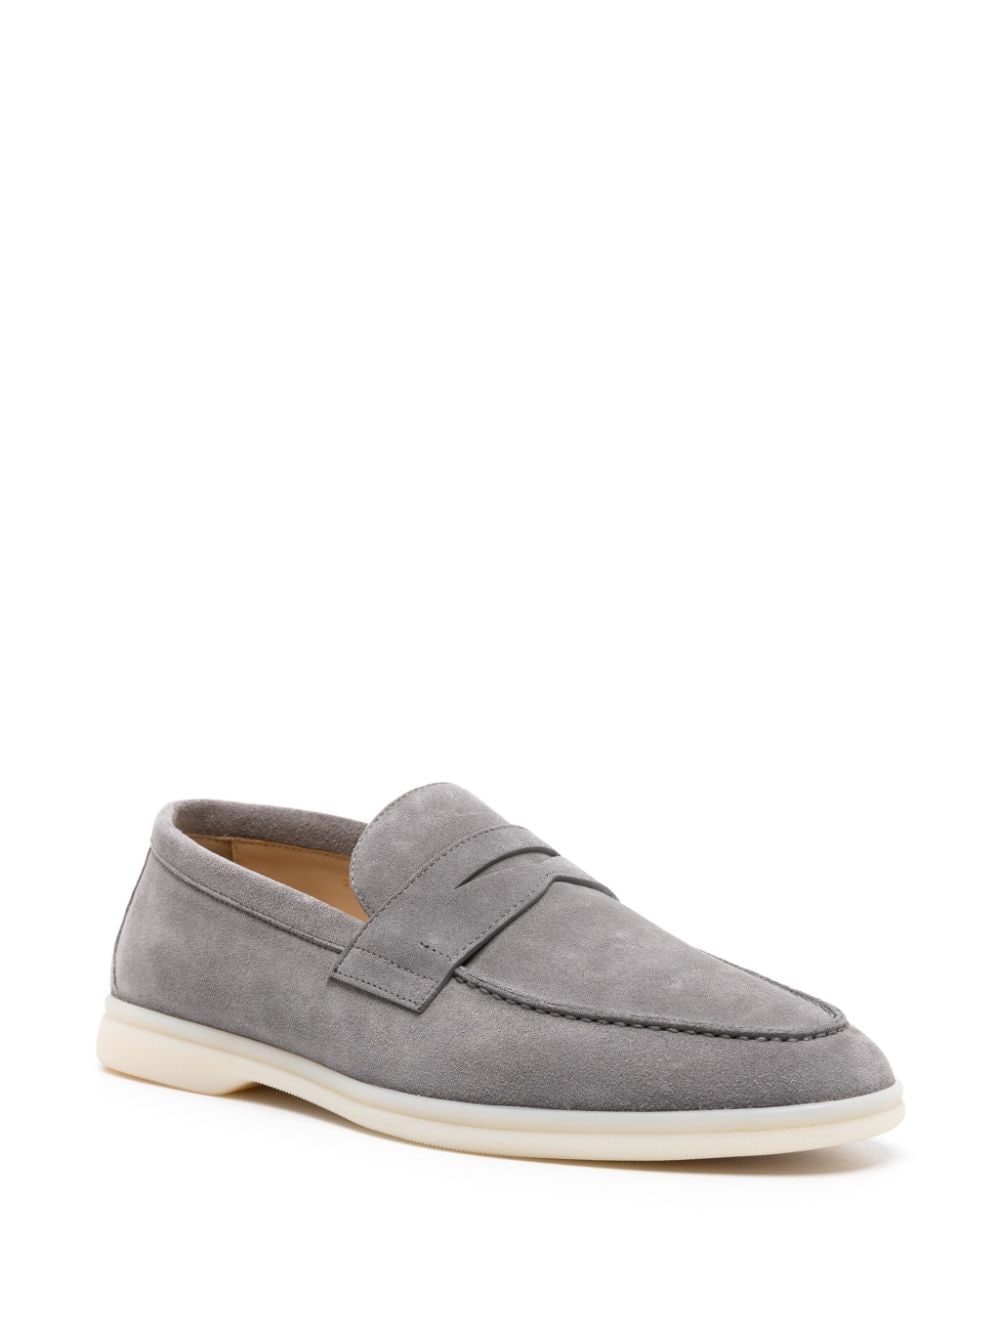 Scarosso Luciano suede penny loafers - Grijs